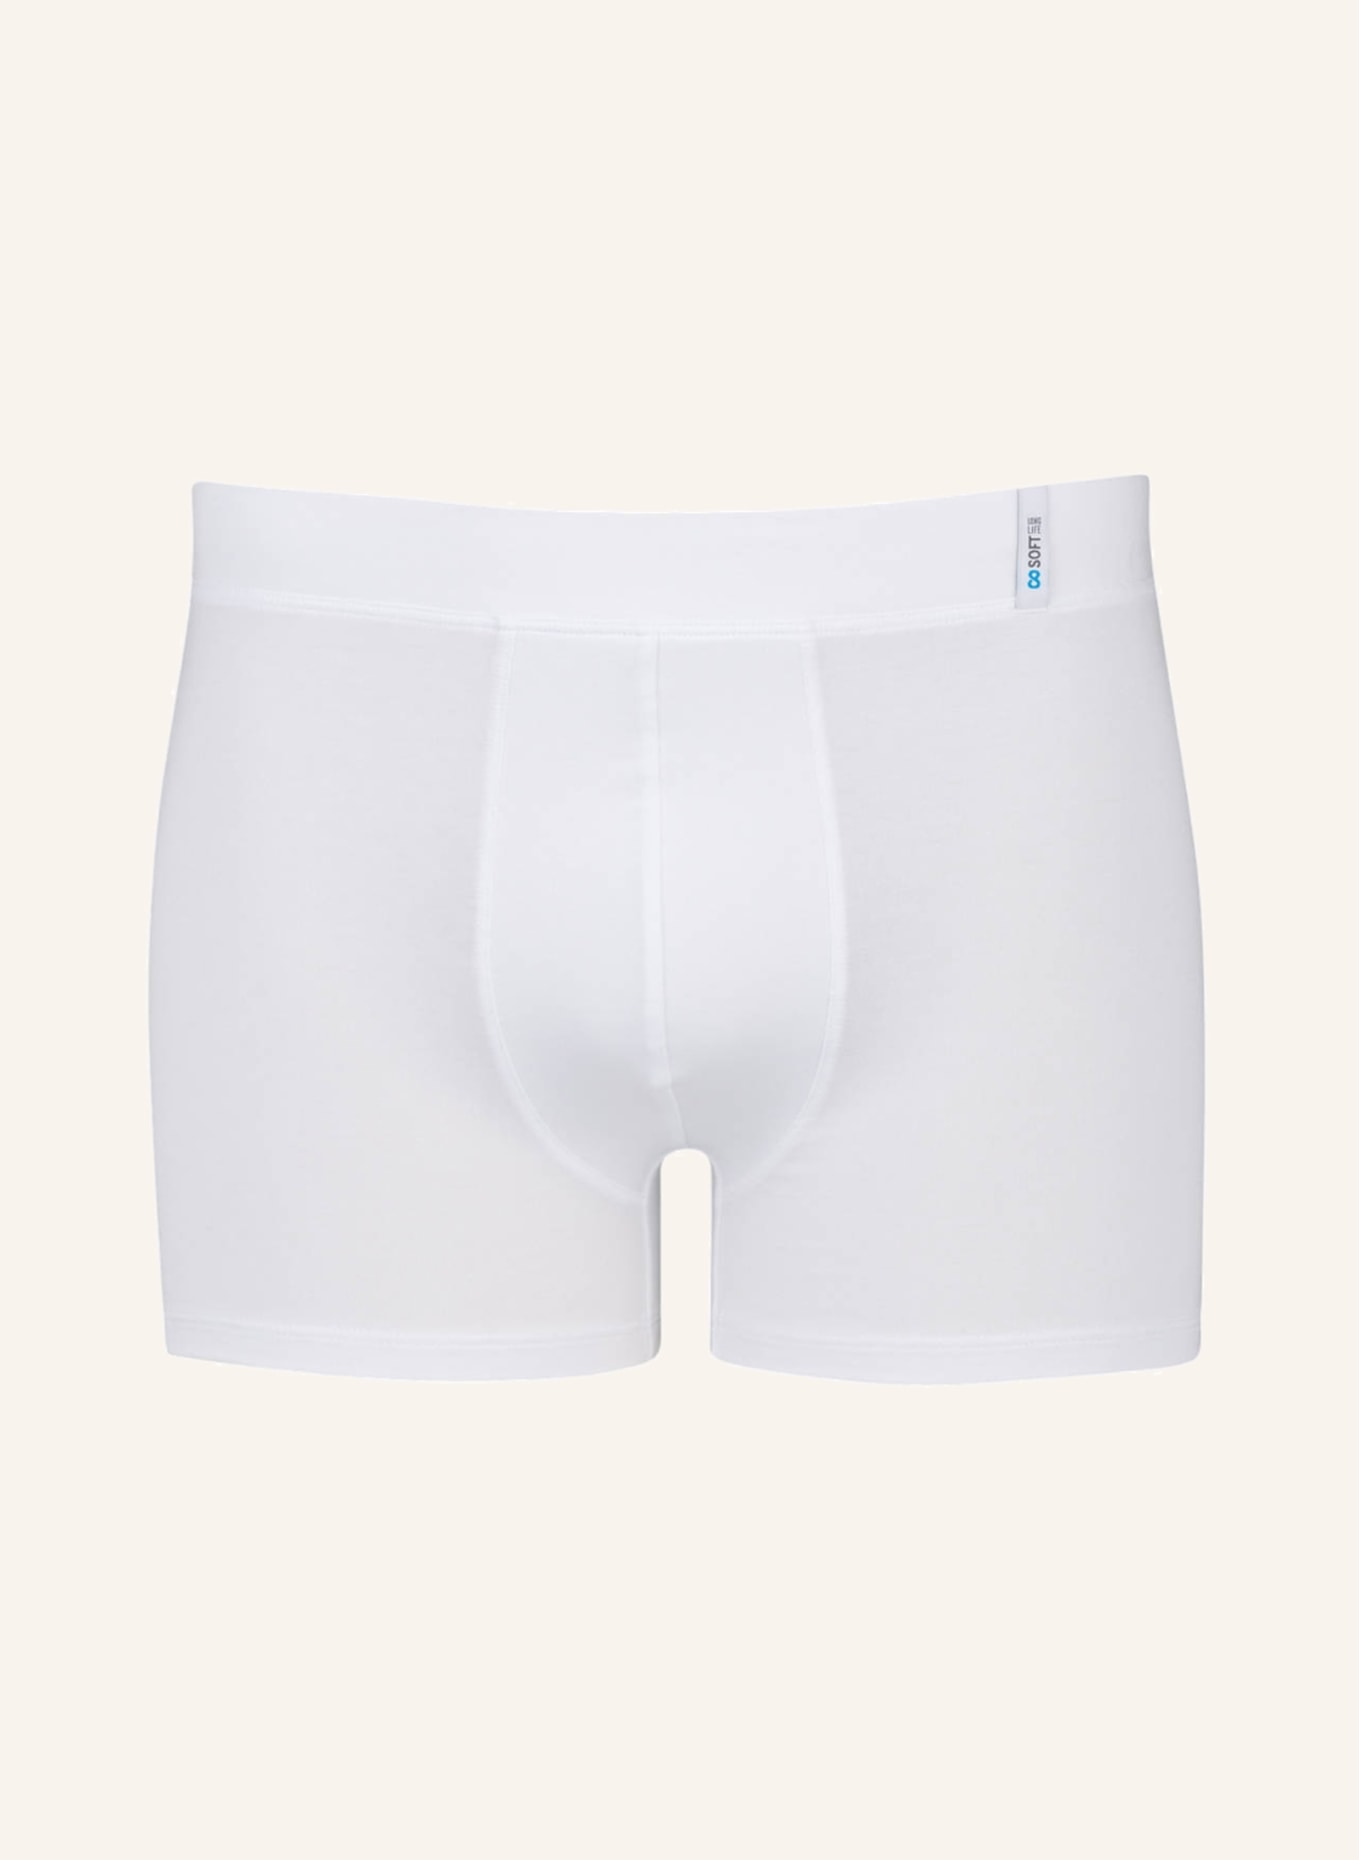 SCHIESSER Boxer shorts LONG LIFE SOFT, Color: WHITE (Image 1)